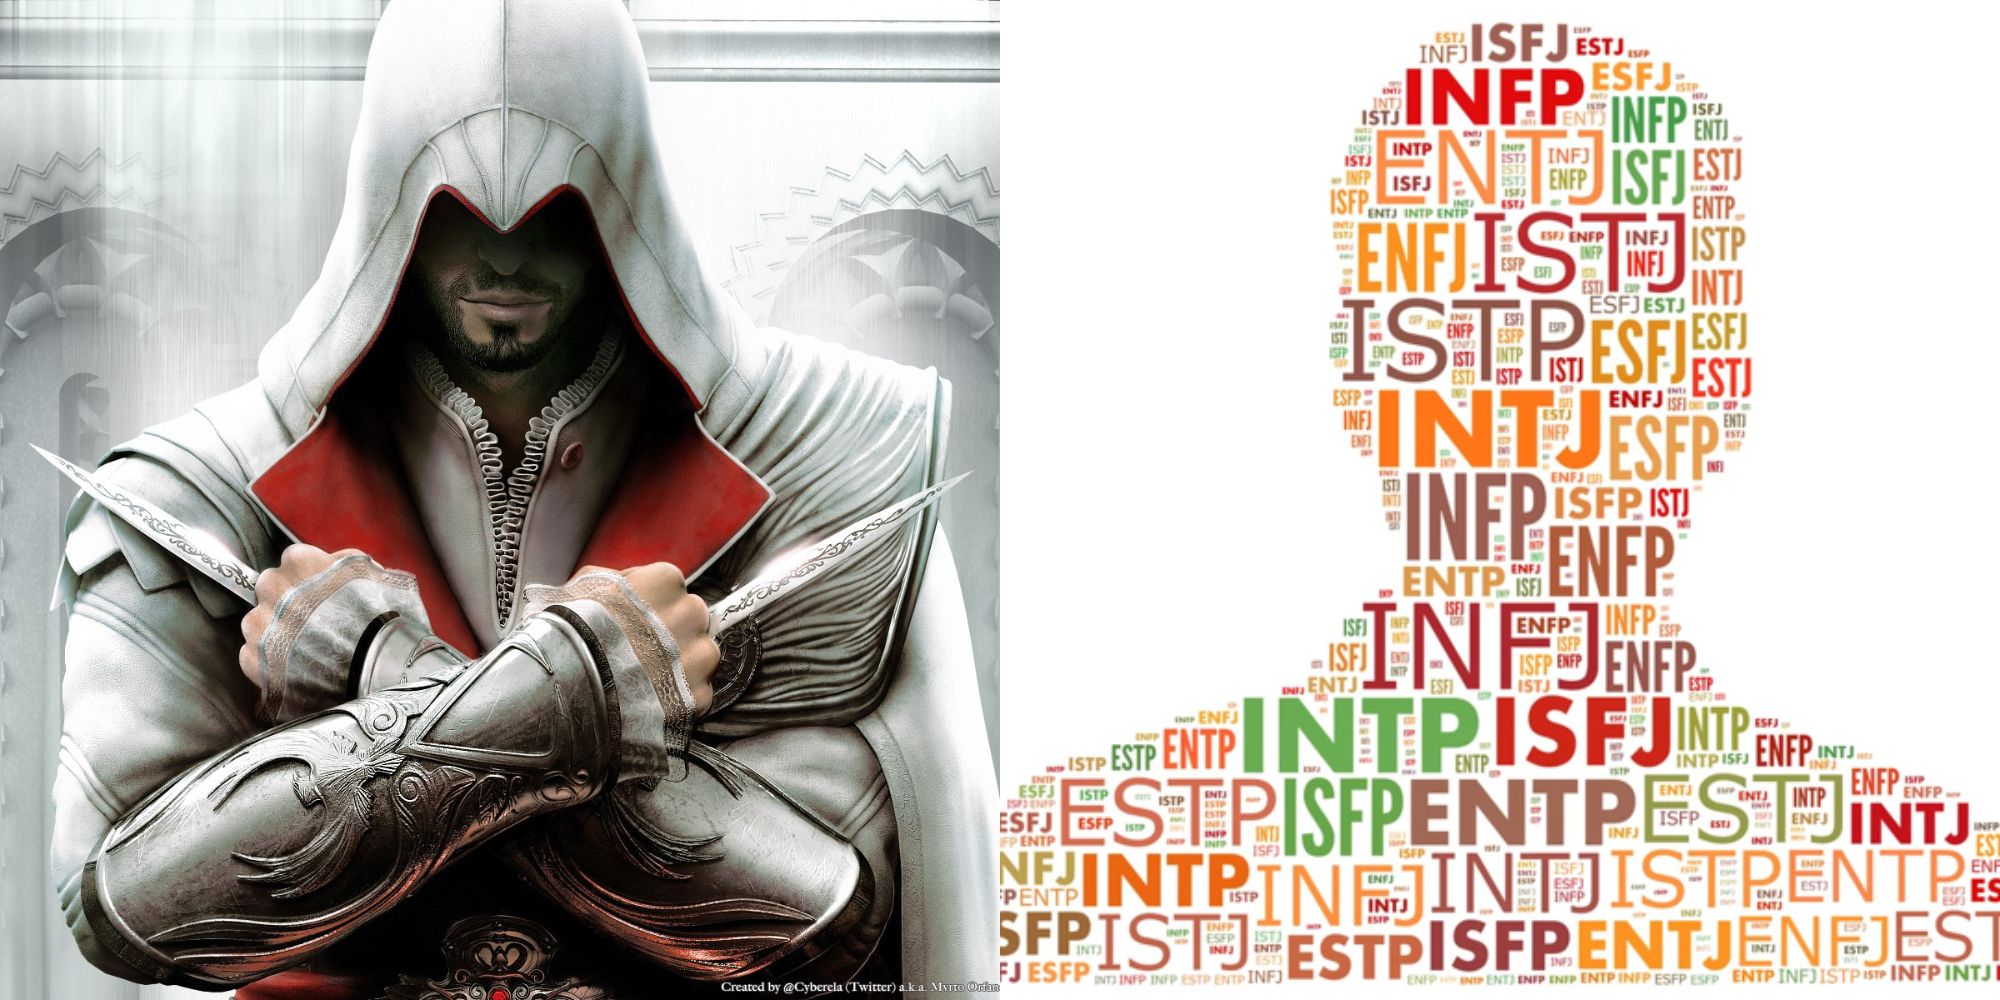 Split image showing Ezio Auditore in Assassin's Creed 2 and an illustration about the MBTI types